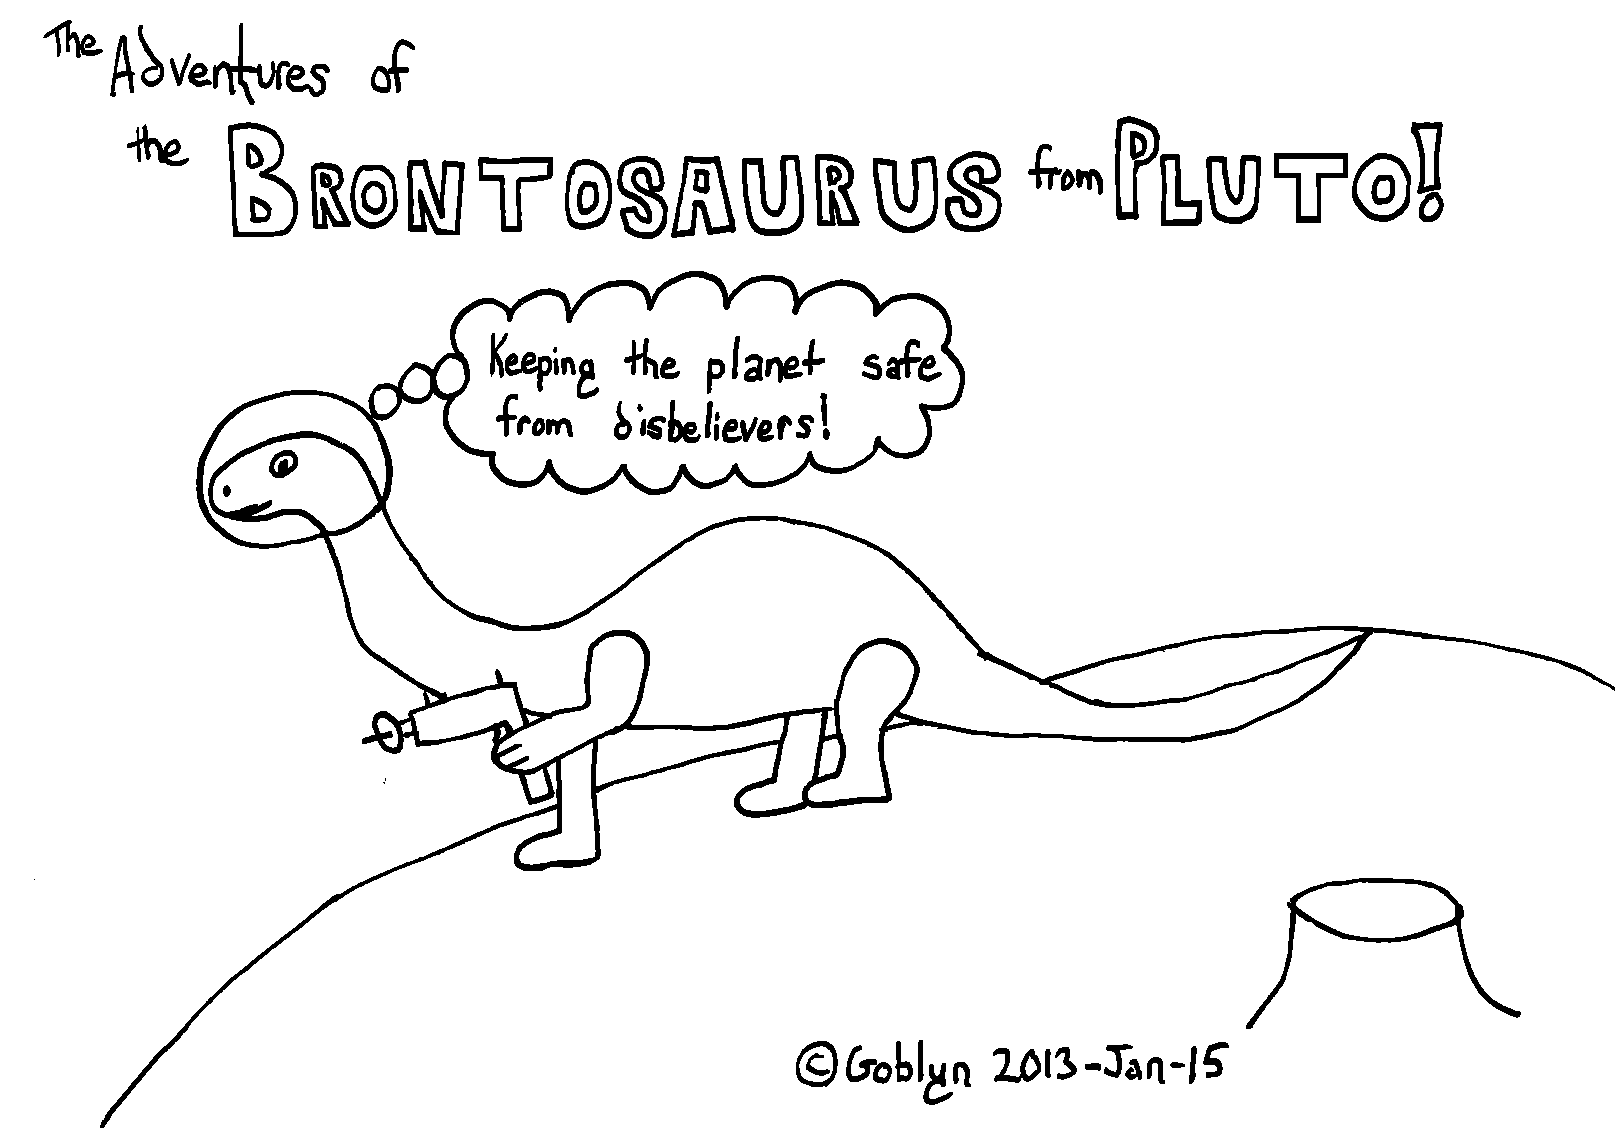 The Adventures of the Brontosaurus from Pluto!